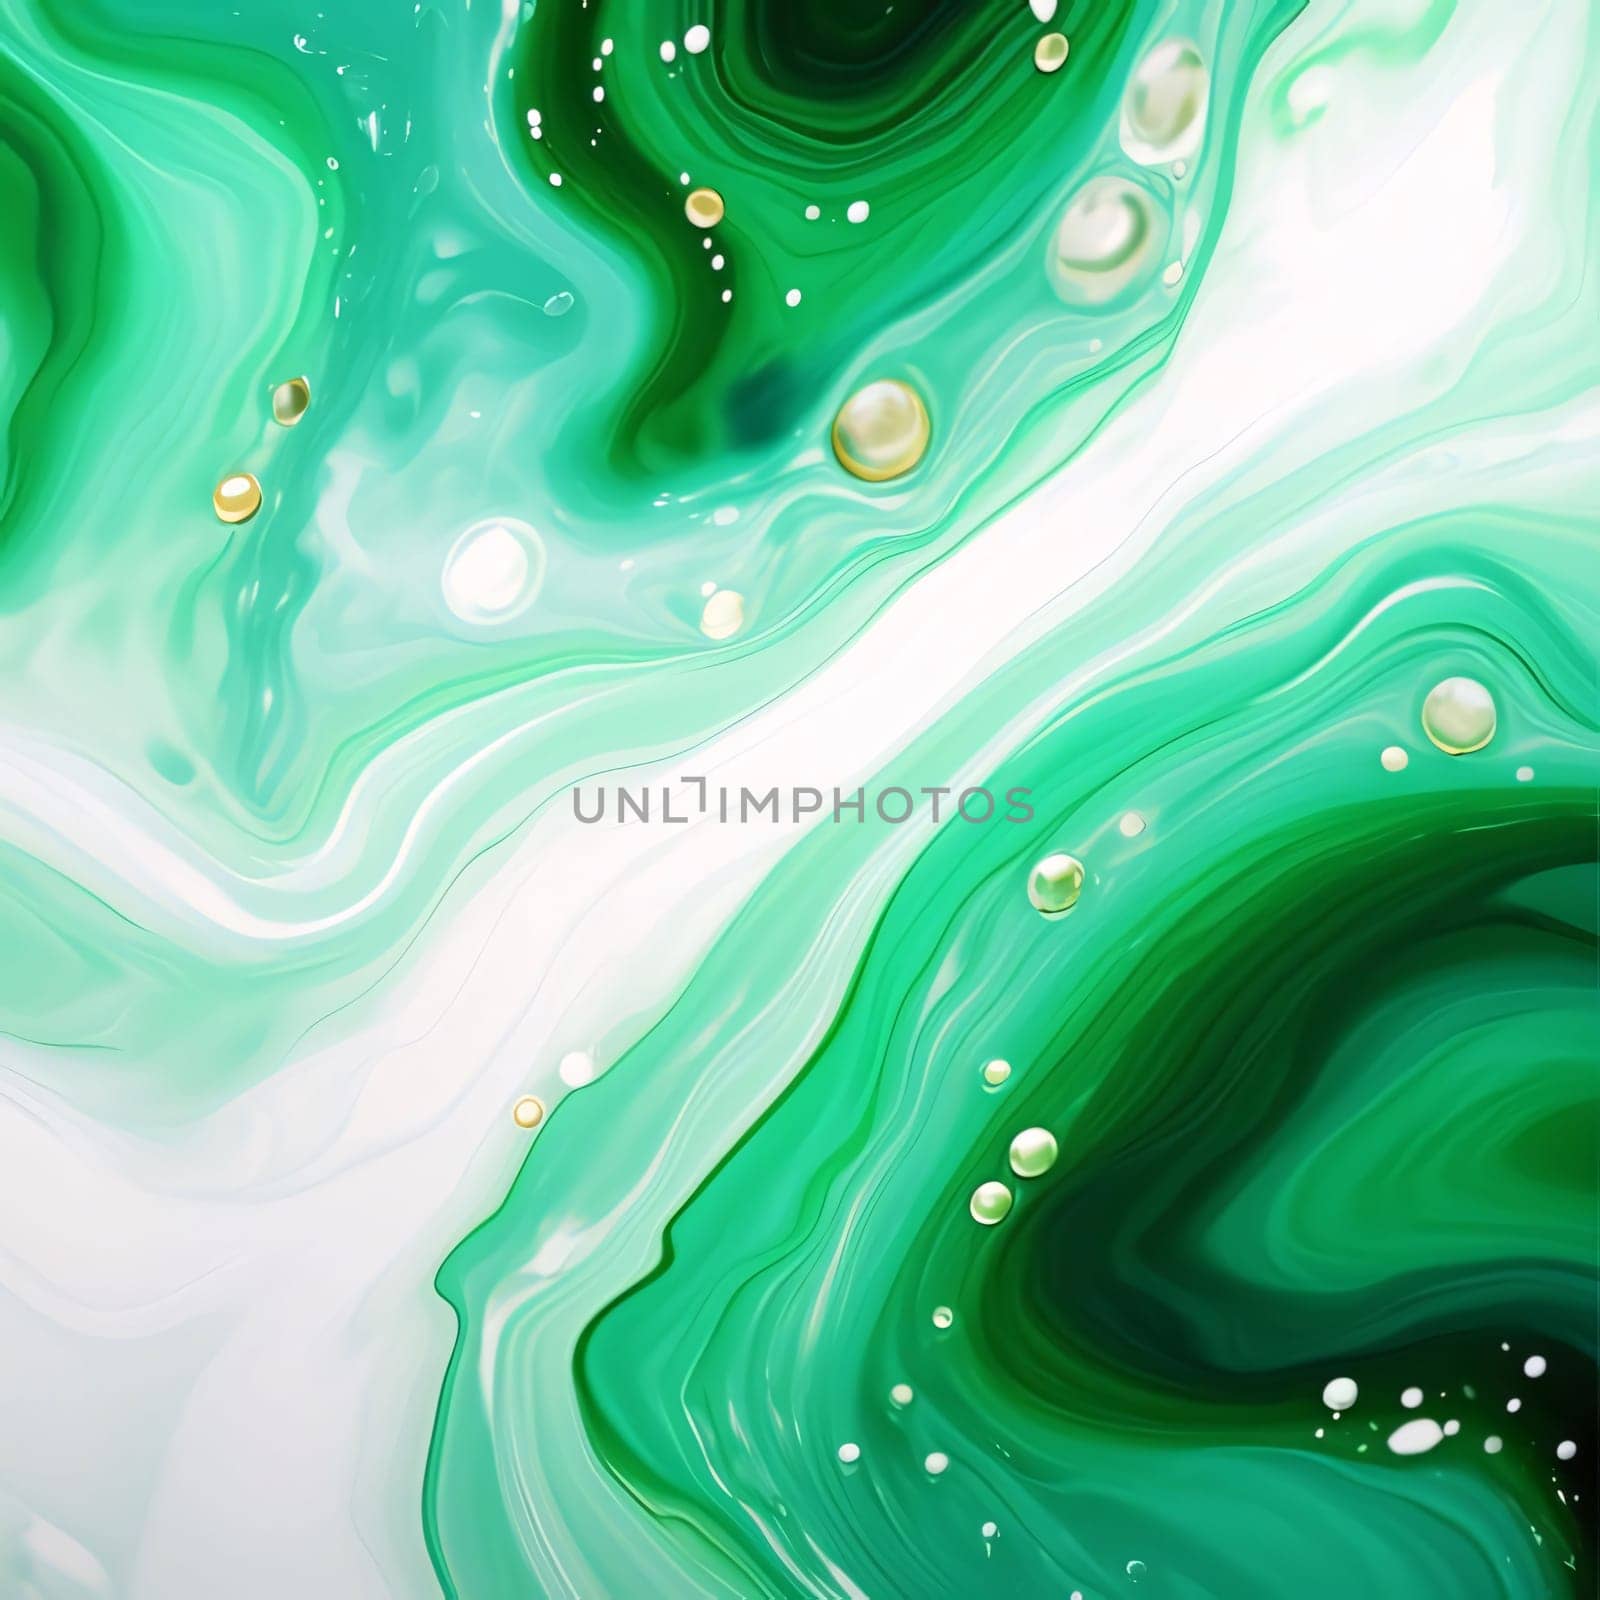 Abstract background design: Abstract background of turquoise and white marble texture. Vector illustration.